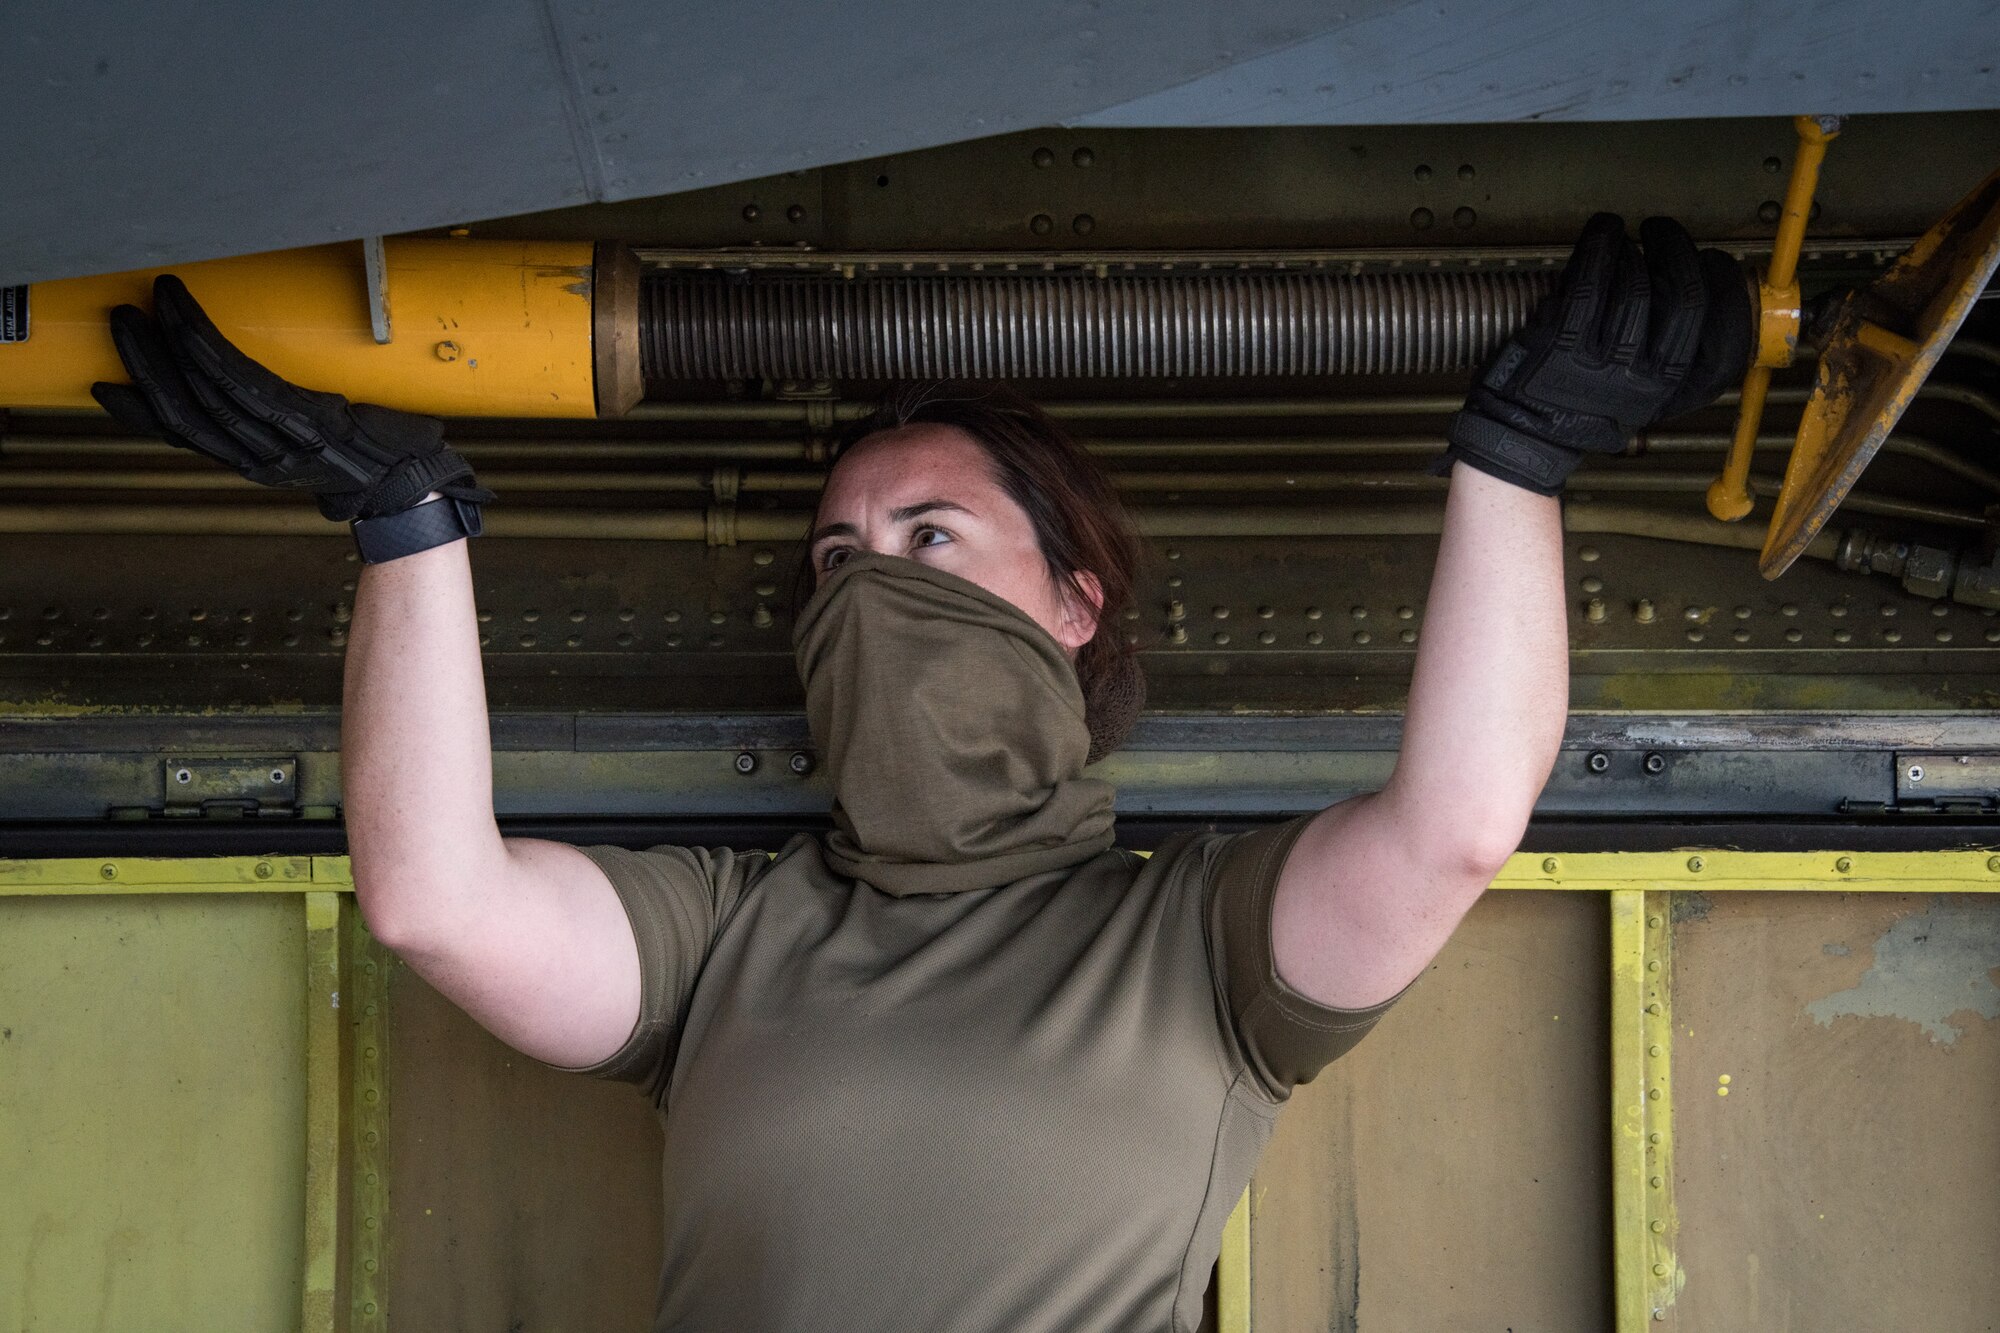 Royal Air Force member loads a boom support jack into a storage compartment